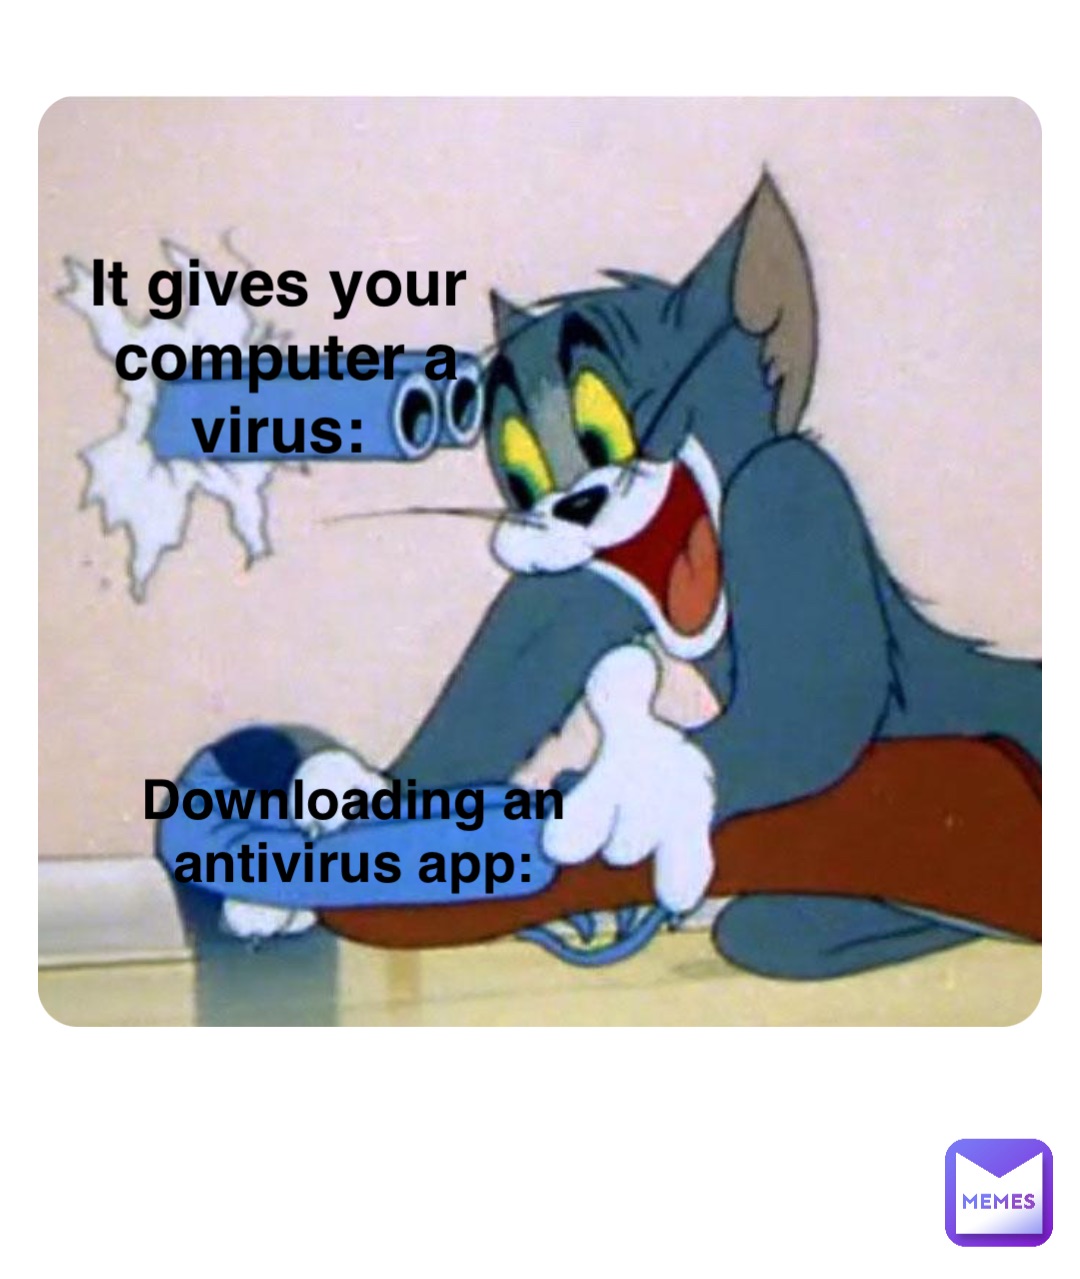 Downloading an antivirus app: It gives your computer a virus: